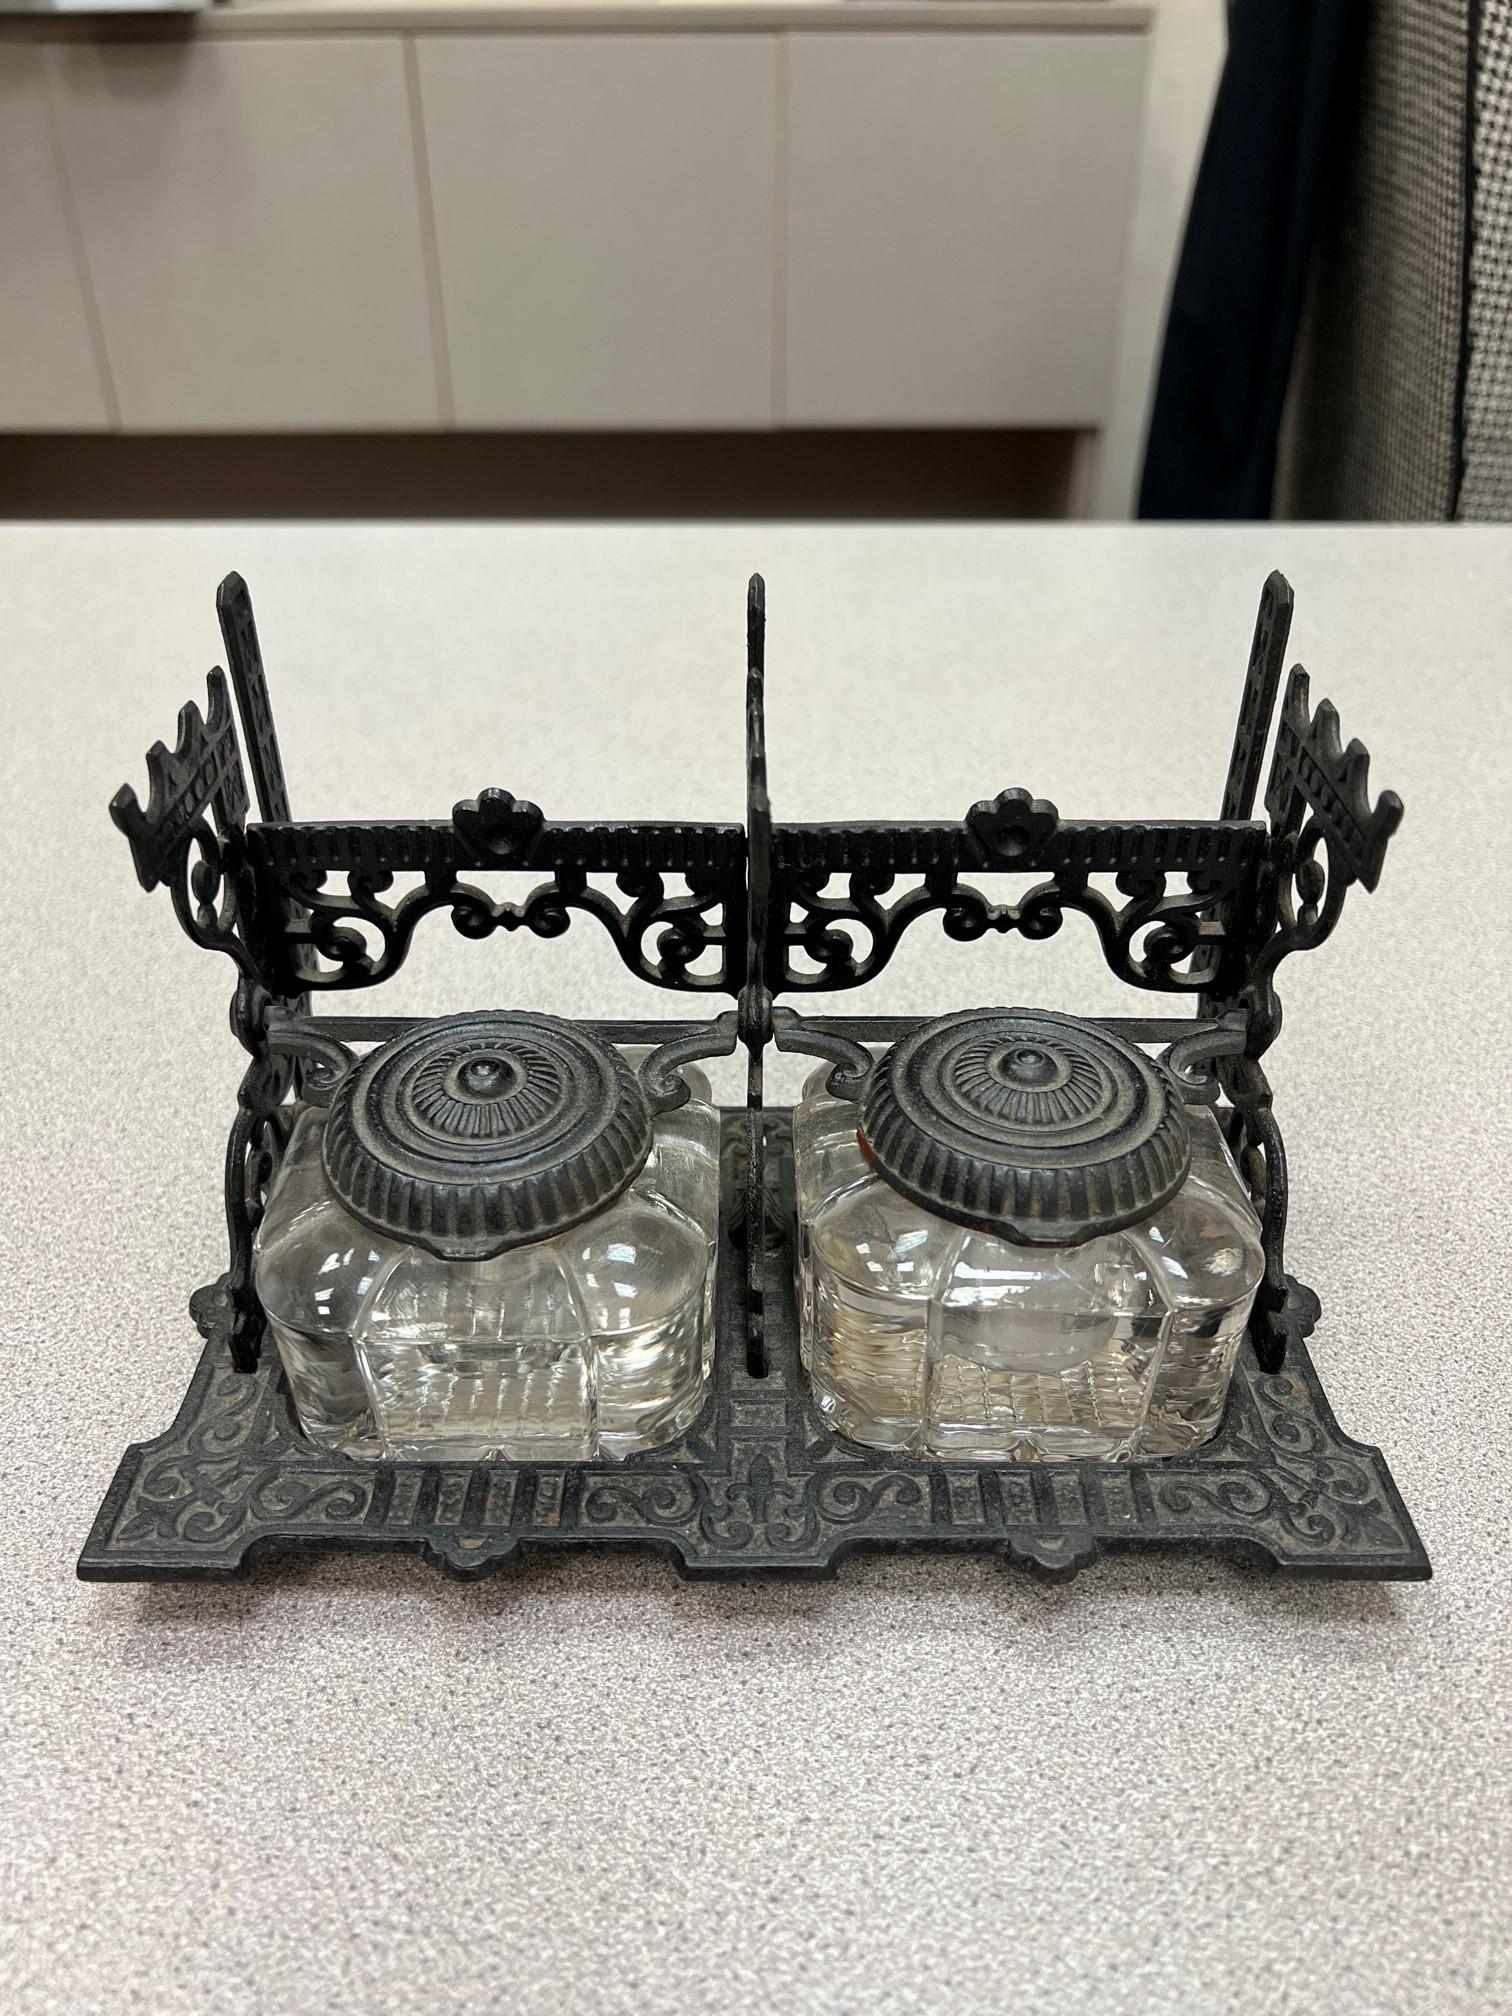 Hard to find antique Victorian Tatum's dual postal inkwell stand with two crystal inkwells in a decorative iron stand with hinged lids and three pen quail rests. The inkwell is signed Tatum's Postal Ink Stand and is in very good condition, a nice